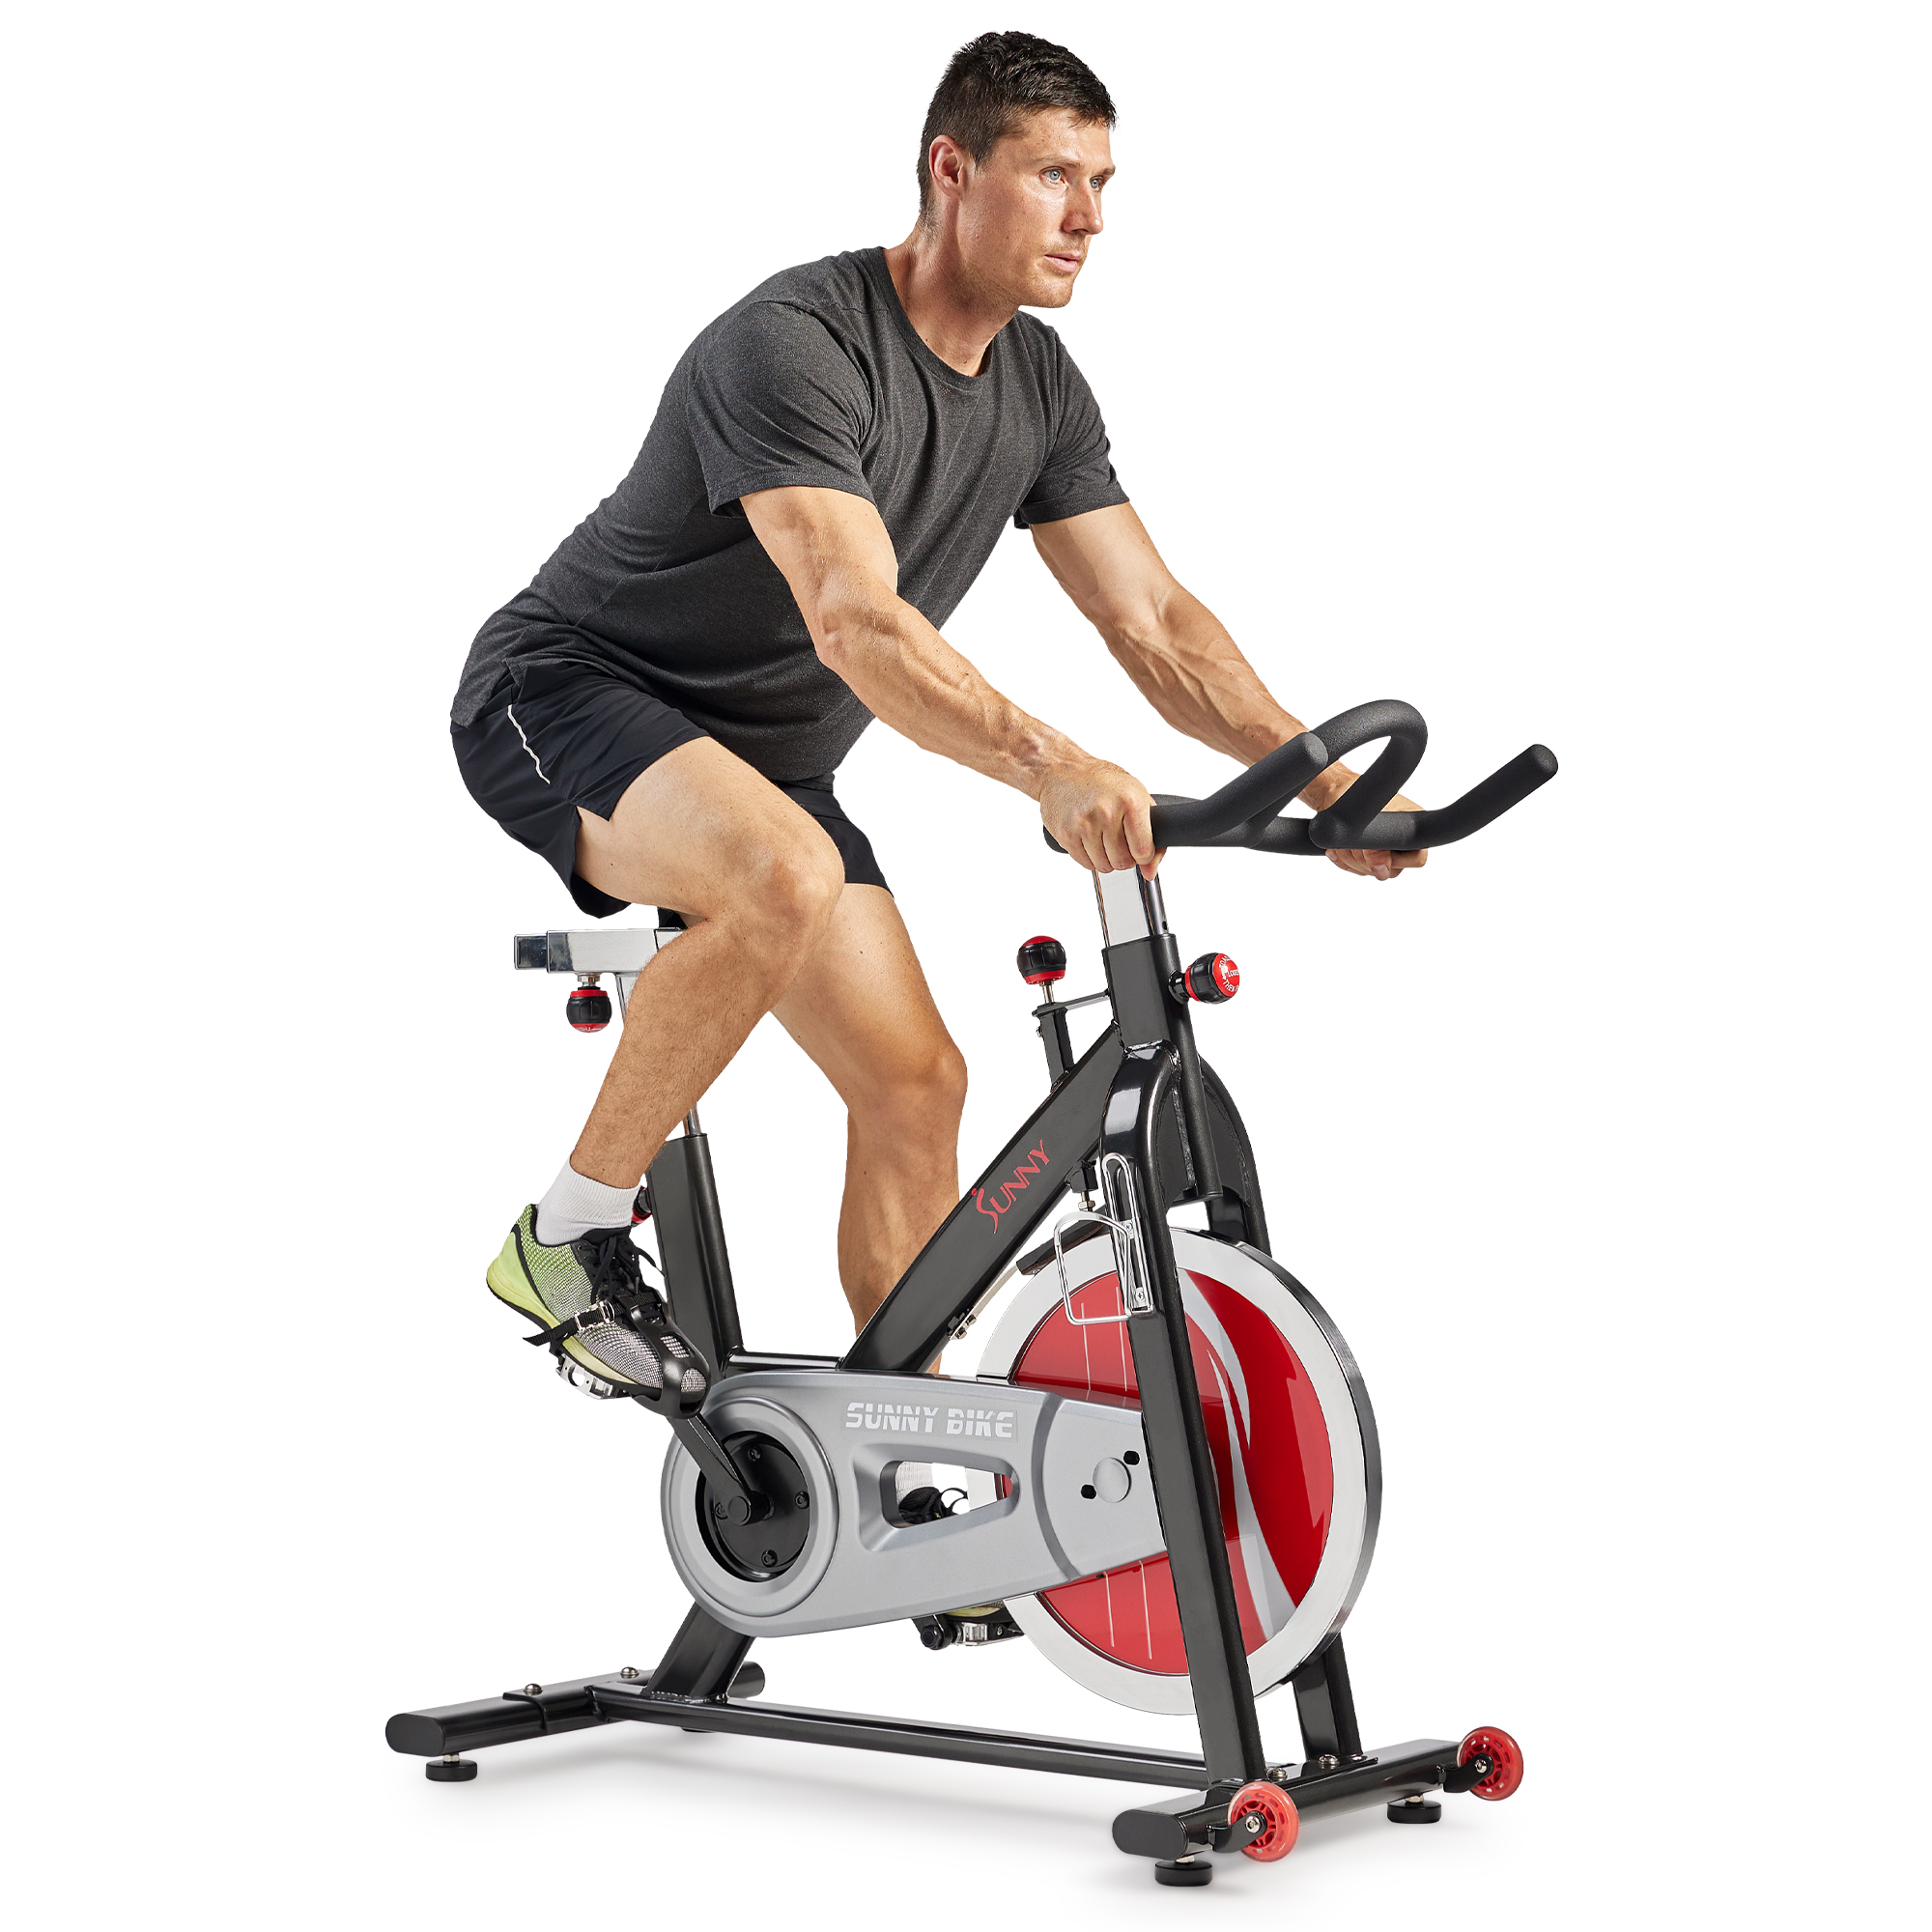 Sunny Health & Fitness Indoor Cycling Exercise Bike Workout Machine Belt Drive - SF-B1002 - image 4 of 9